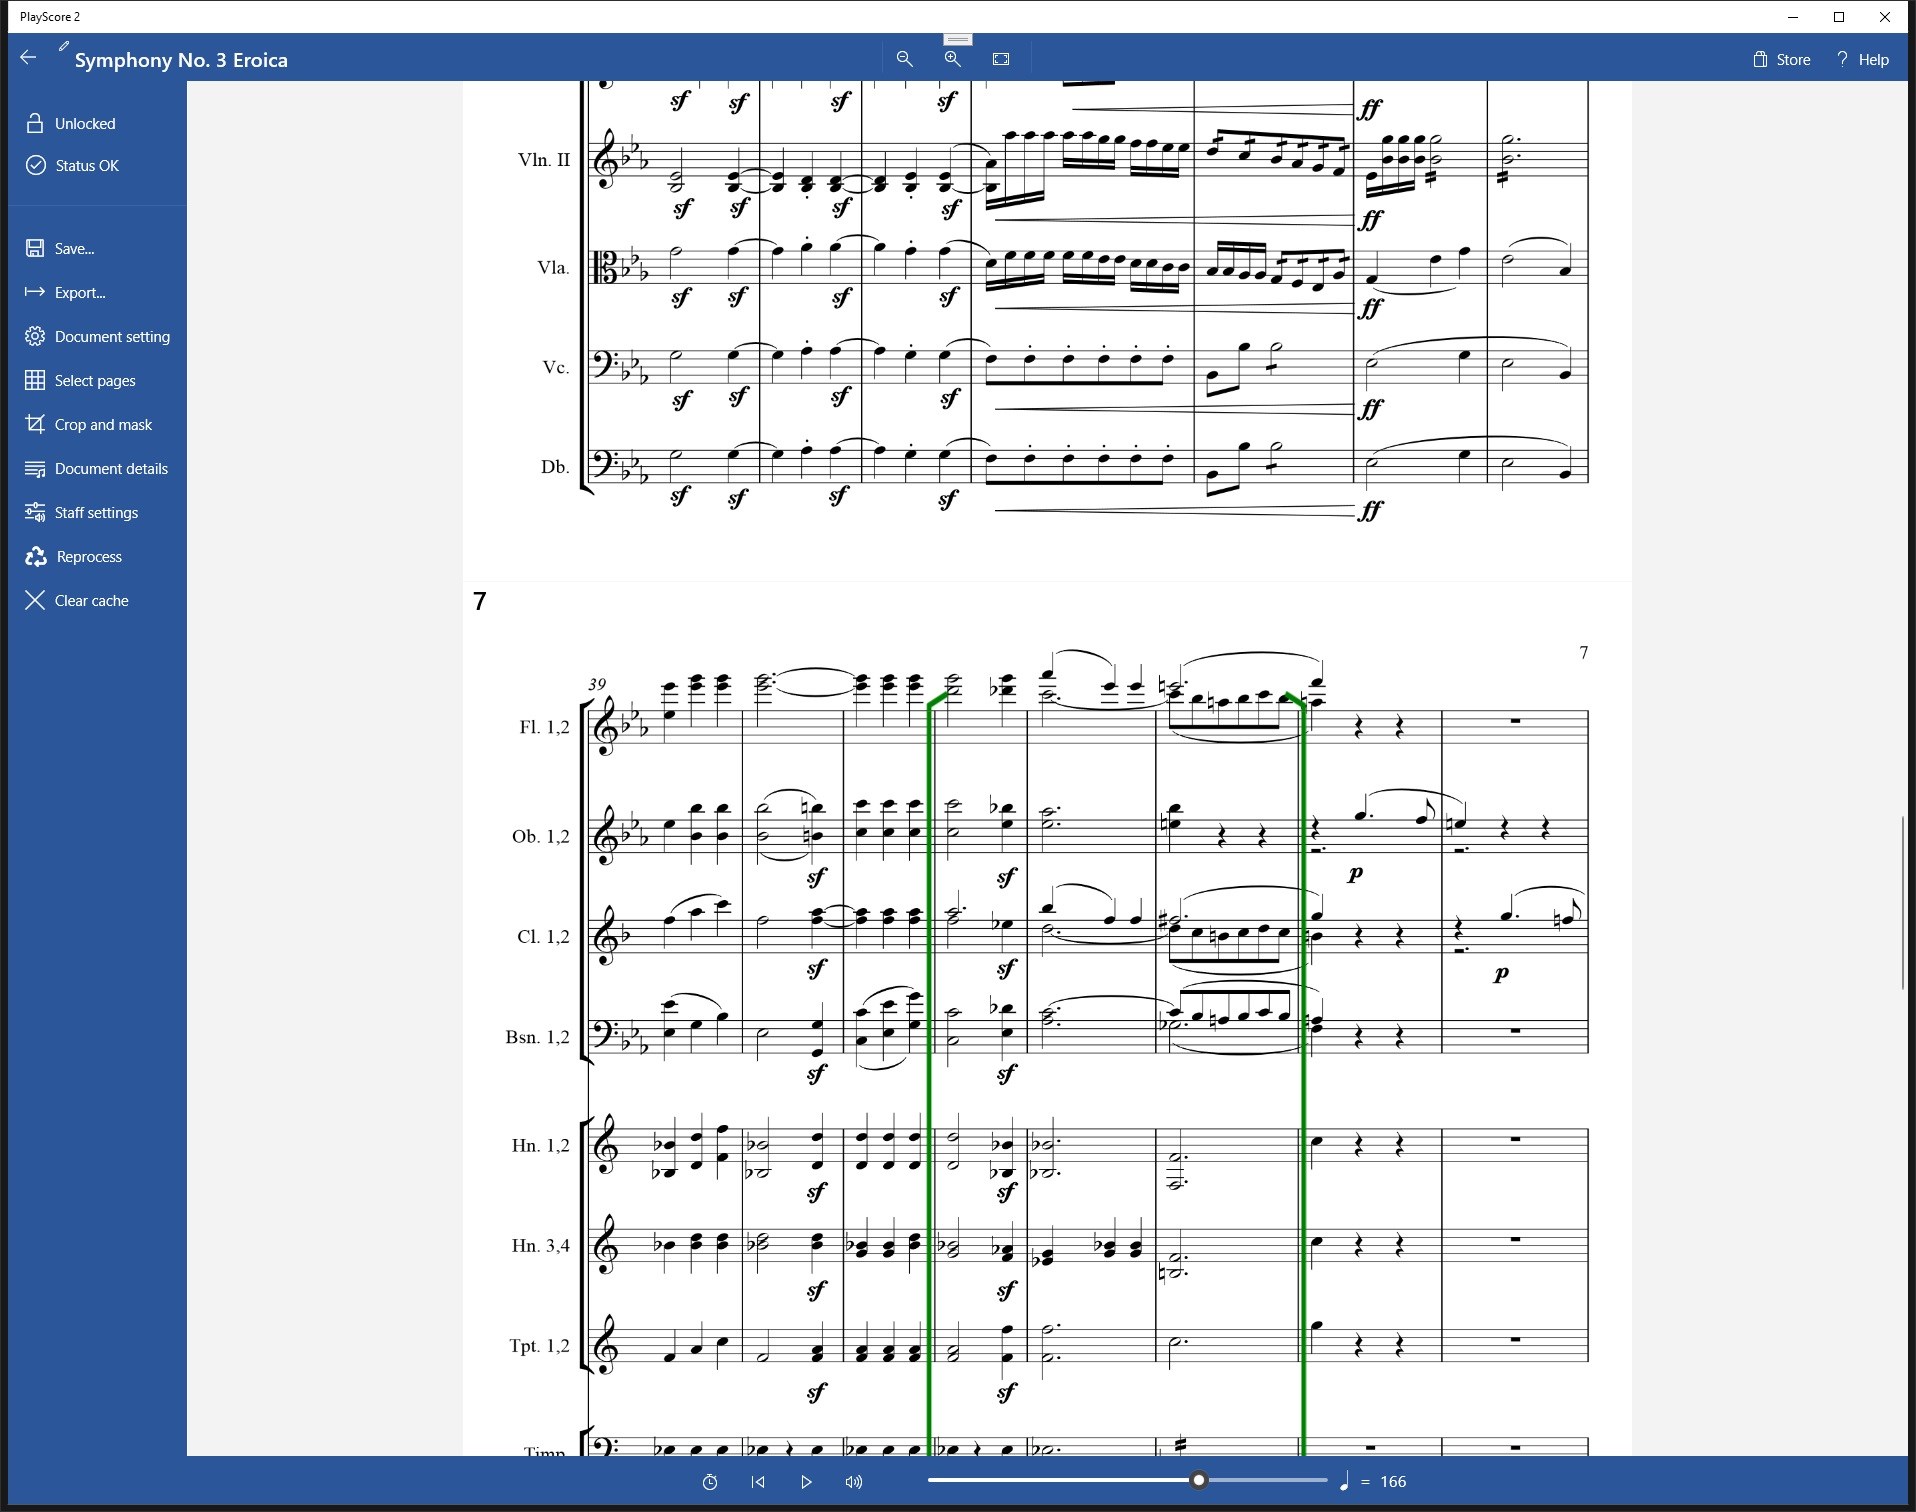 PlayScore 2 sheet music scanning app - exports MIDI and MusicXML